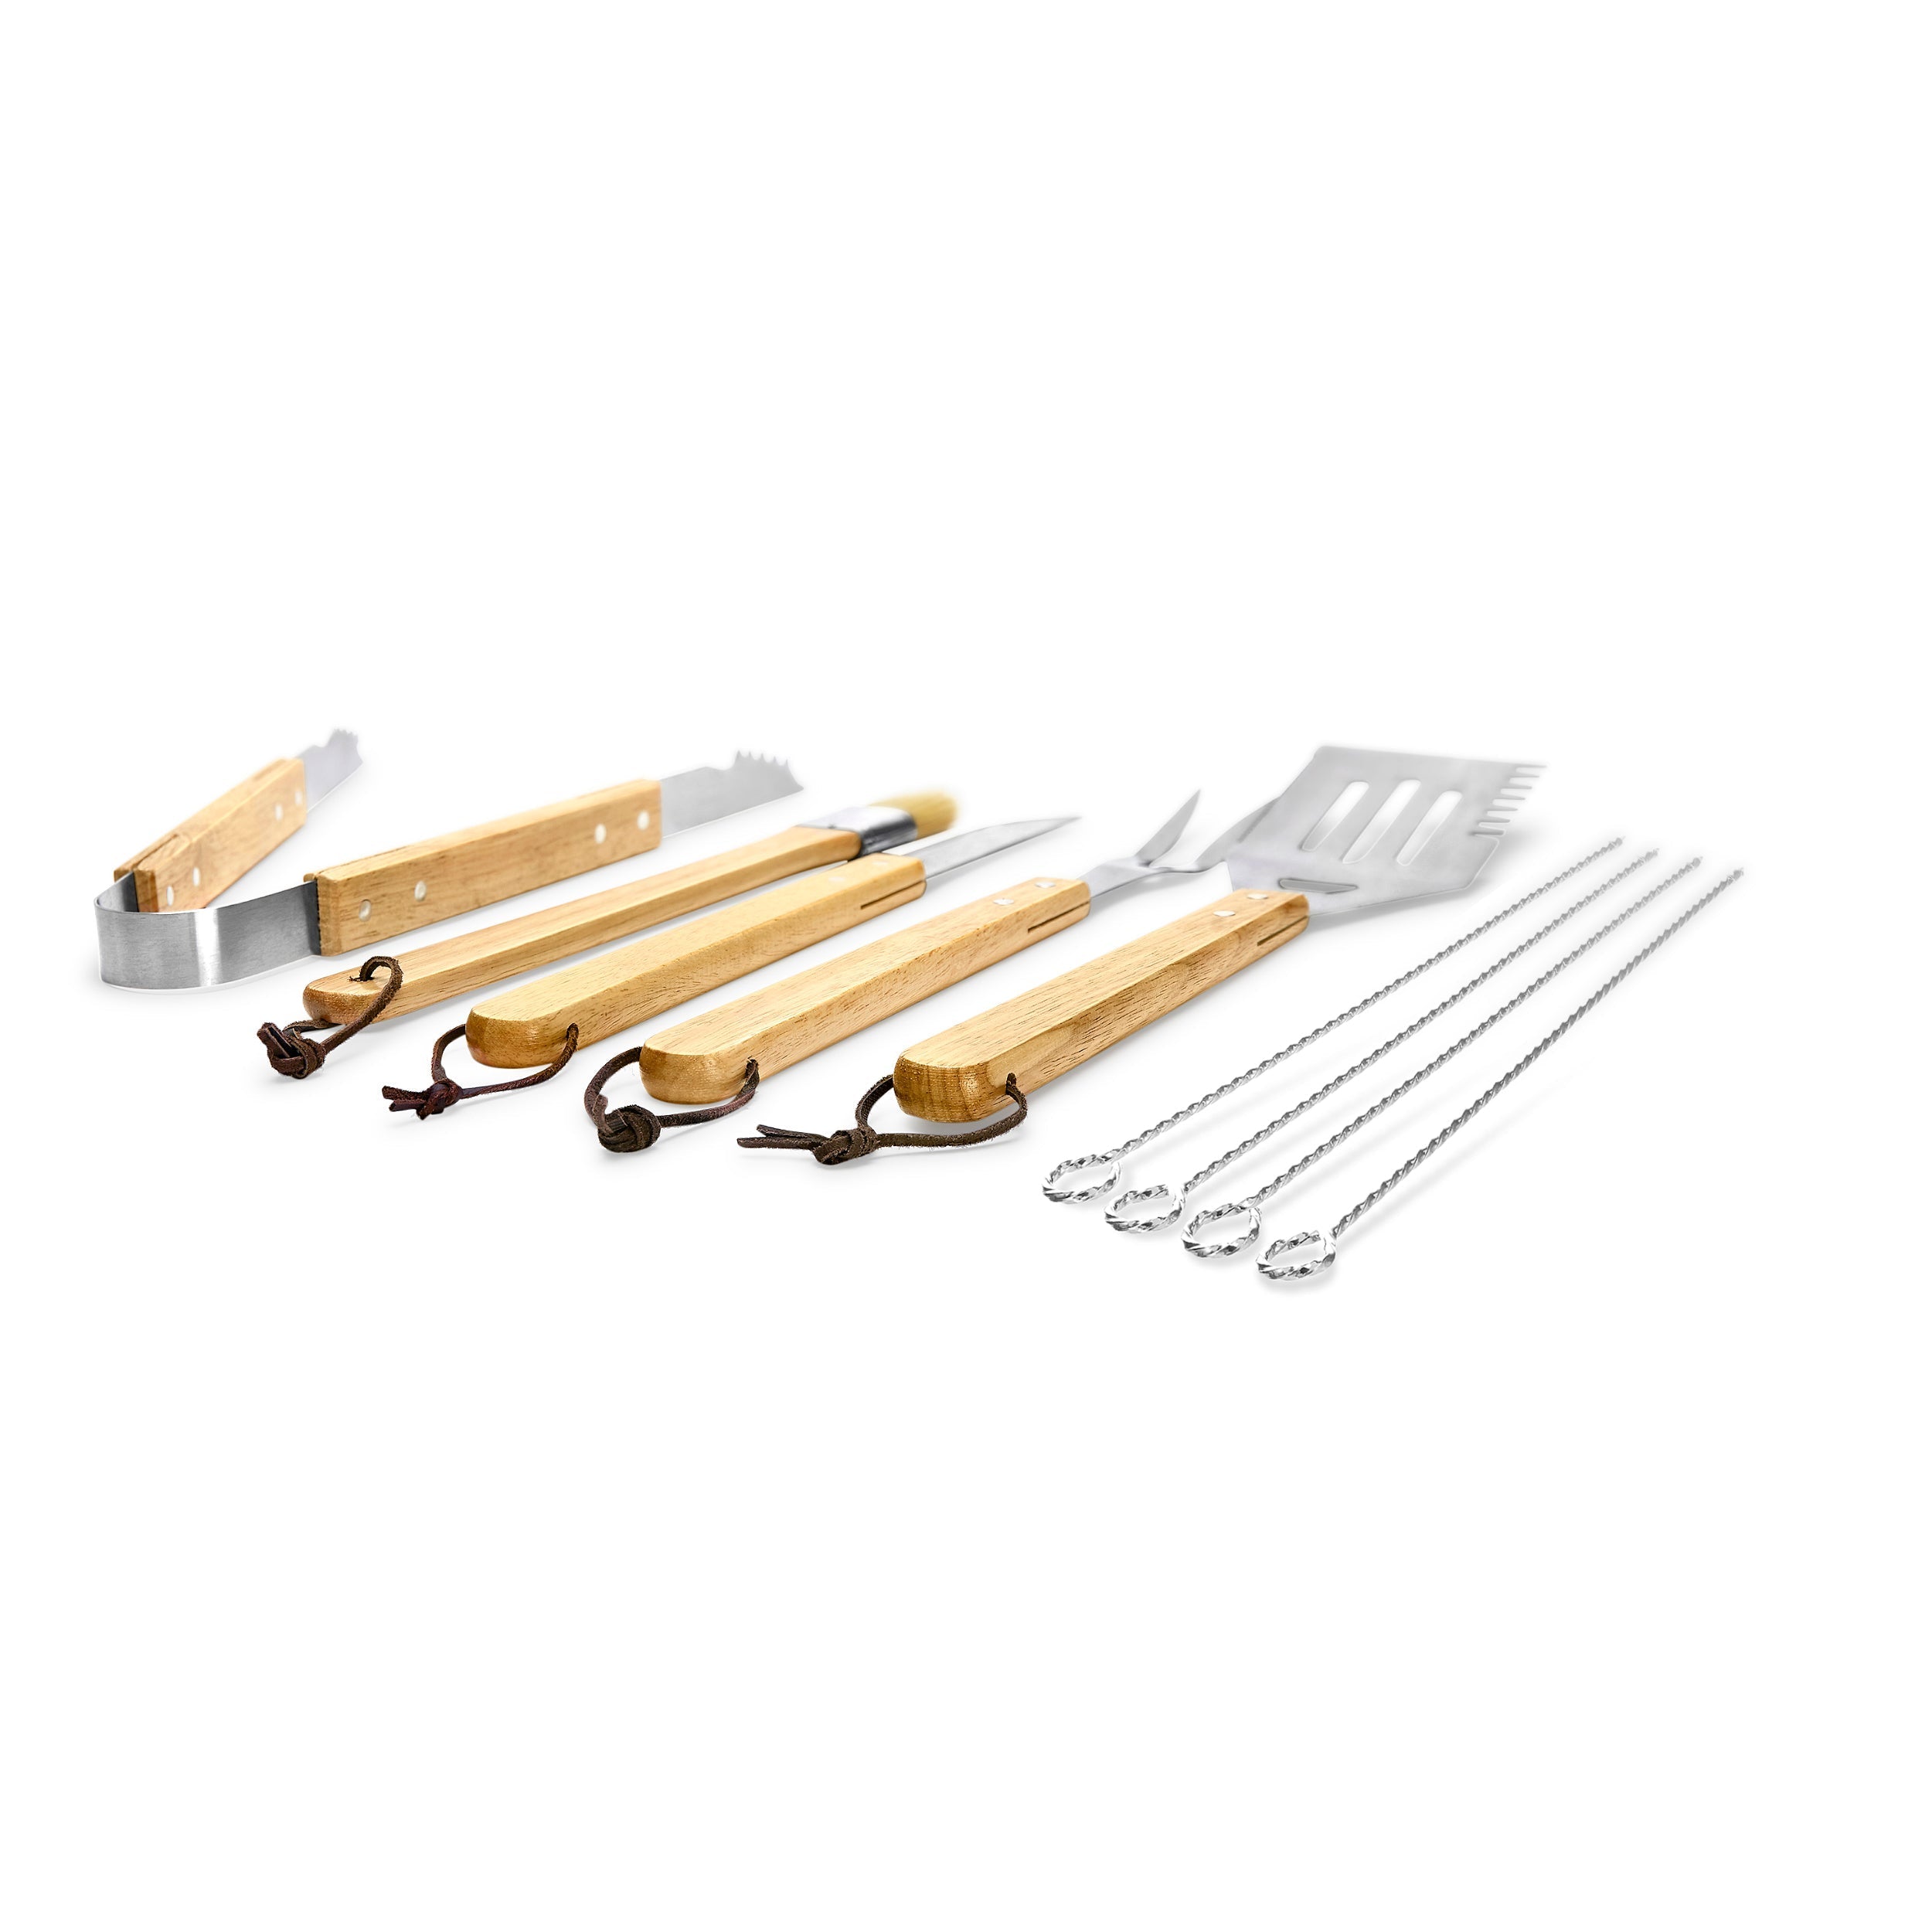 11 Piece BBQ Grill Set - Eat Drink Grill